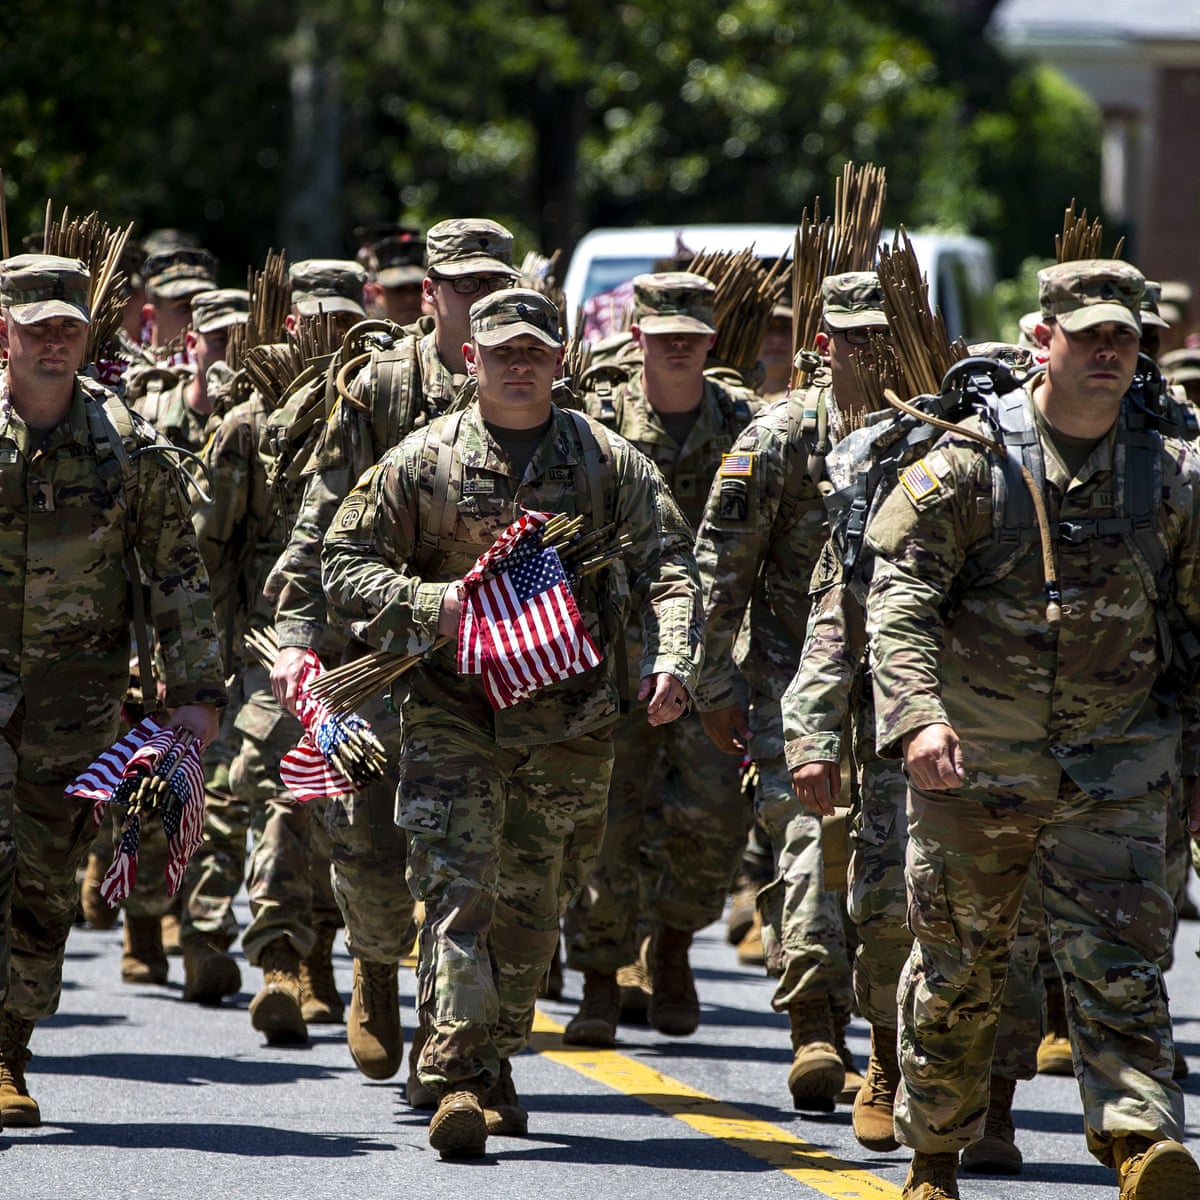 US army begins discharging soldiers who refuse Covid vaccine | US military  | The Guardian